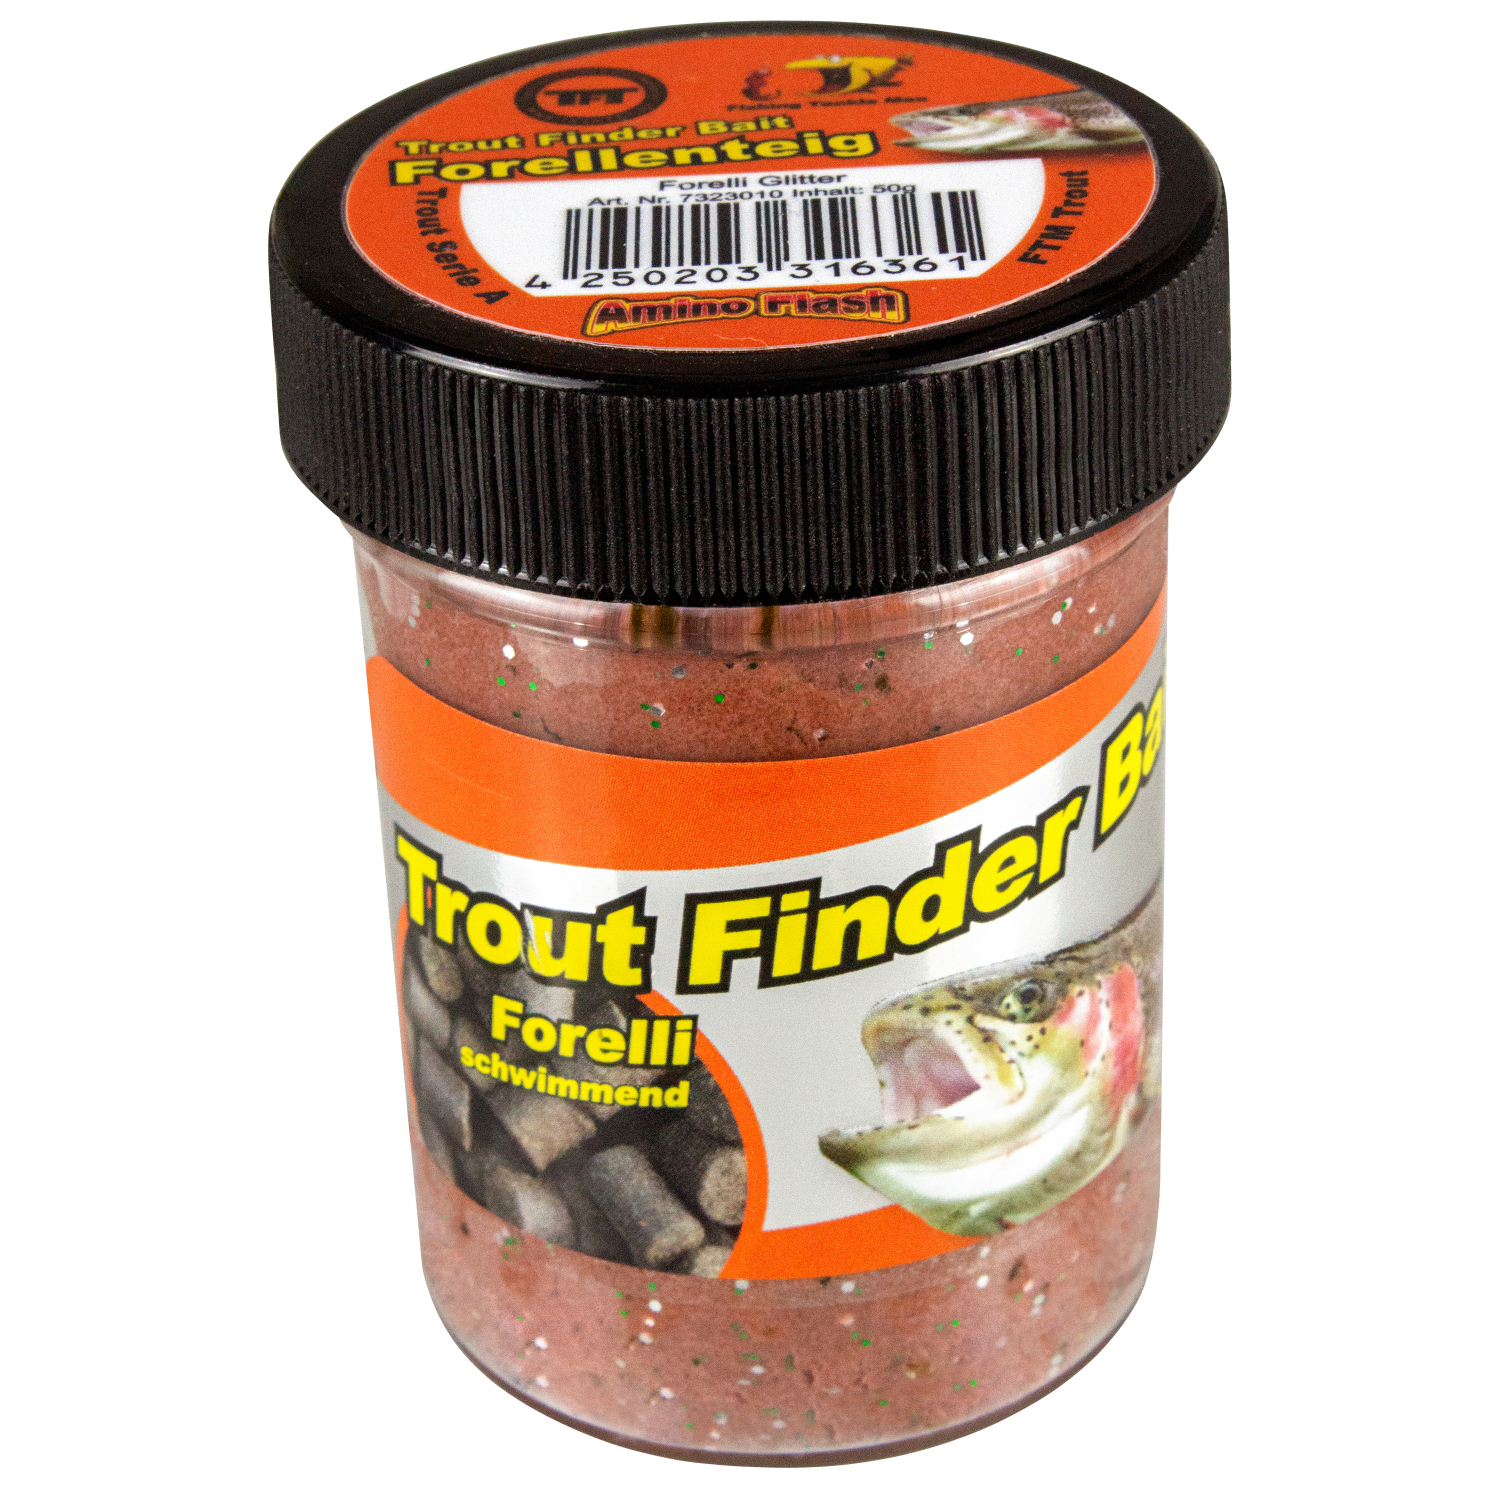 FTM Trout Dough Trout Finder Bait floating (brown, Forelli) 